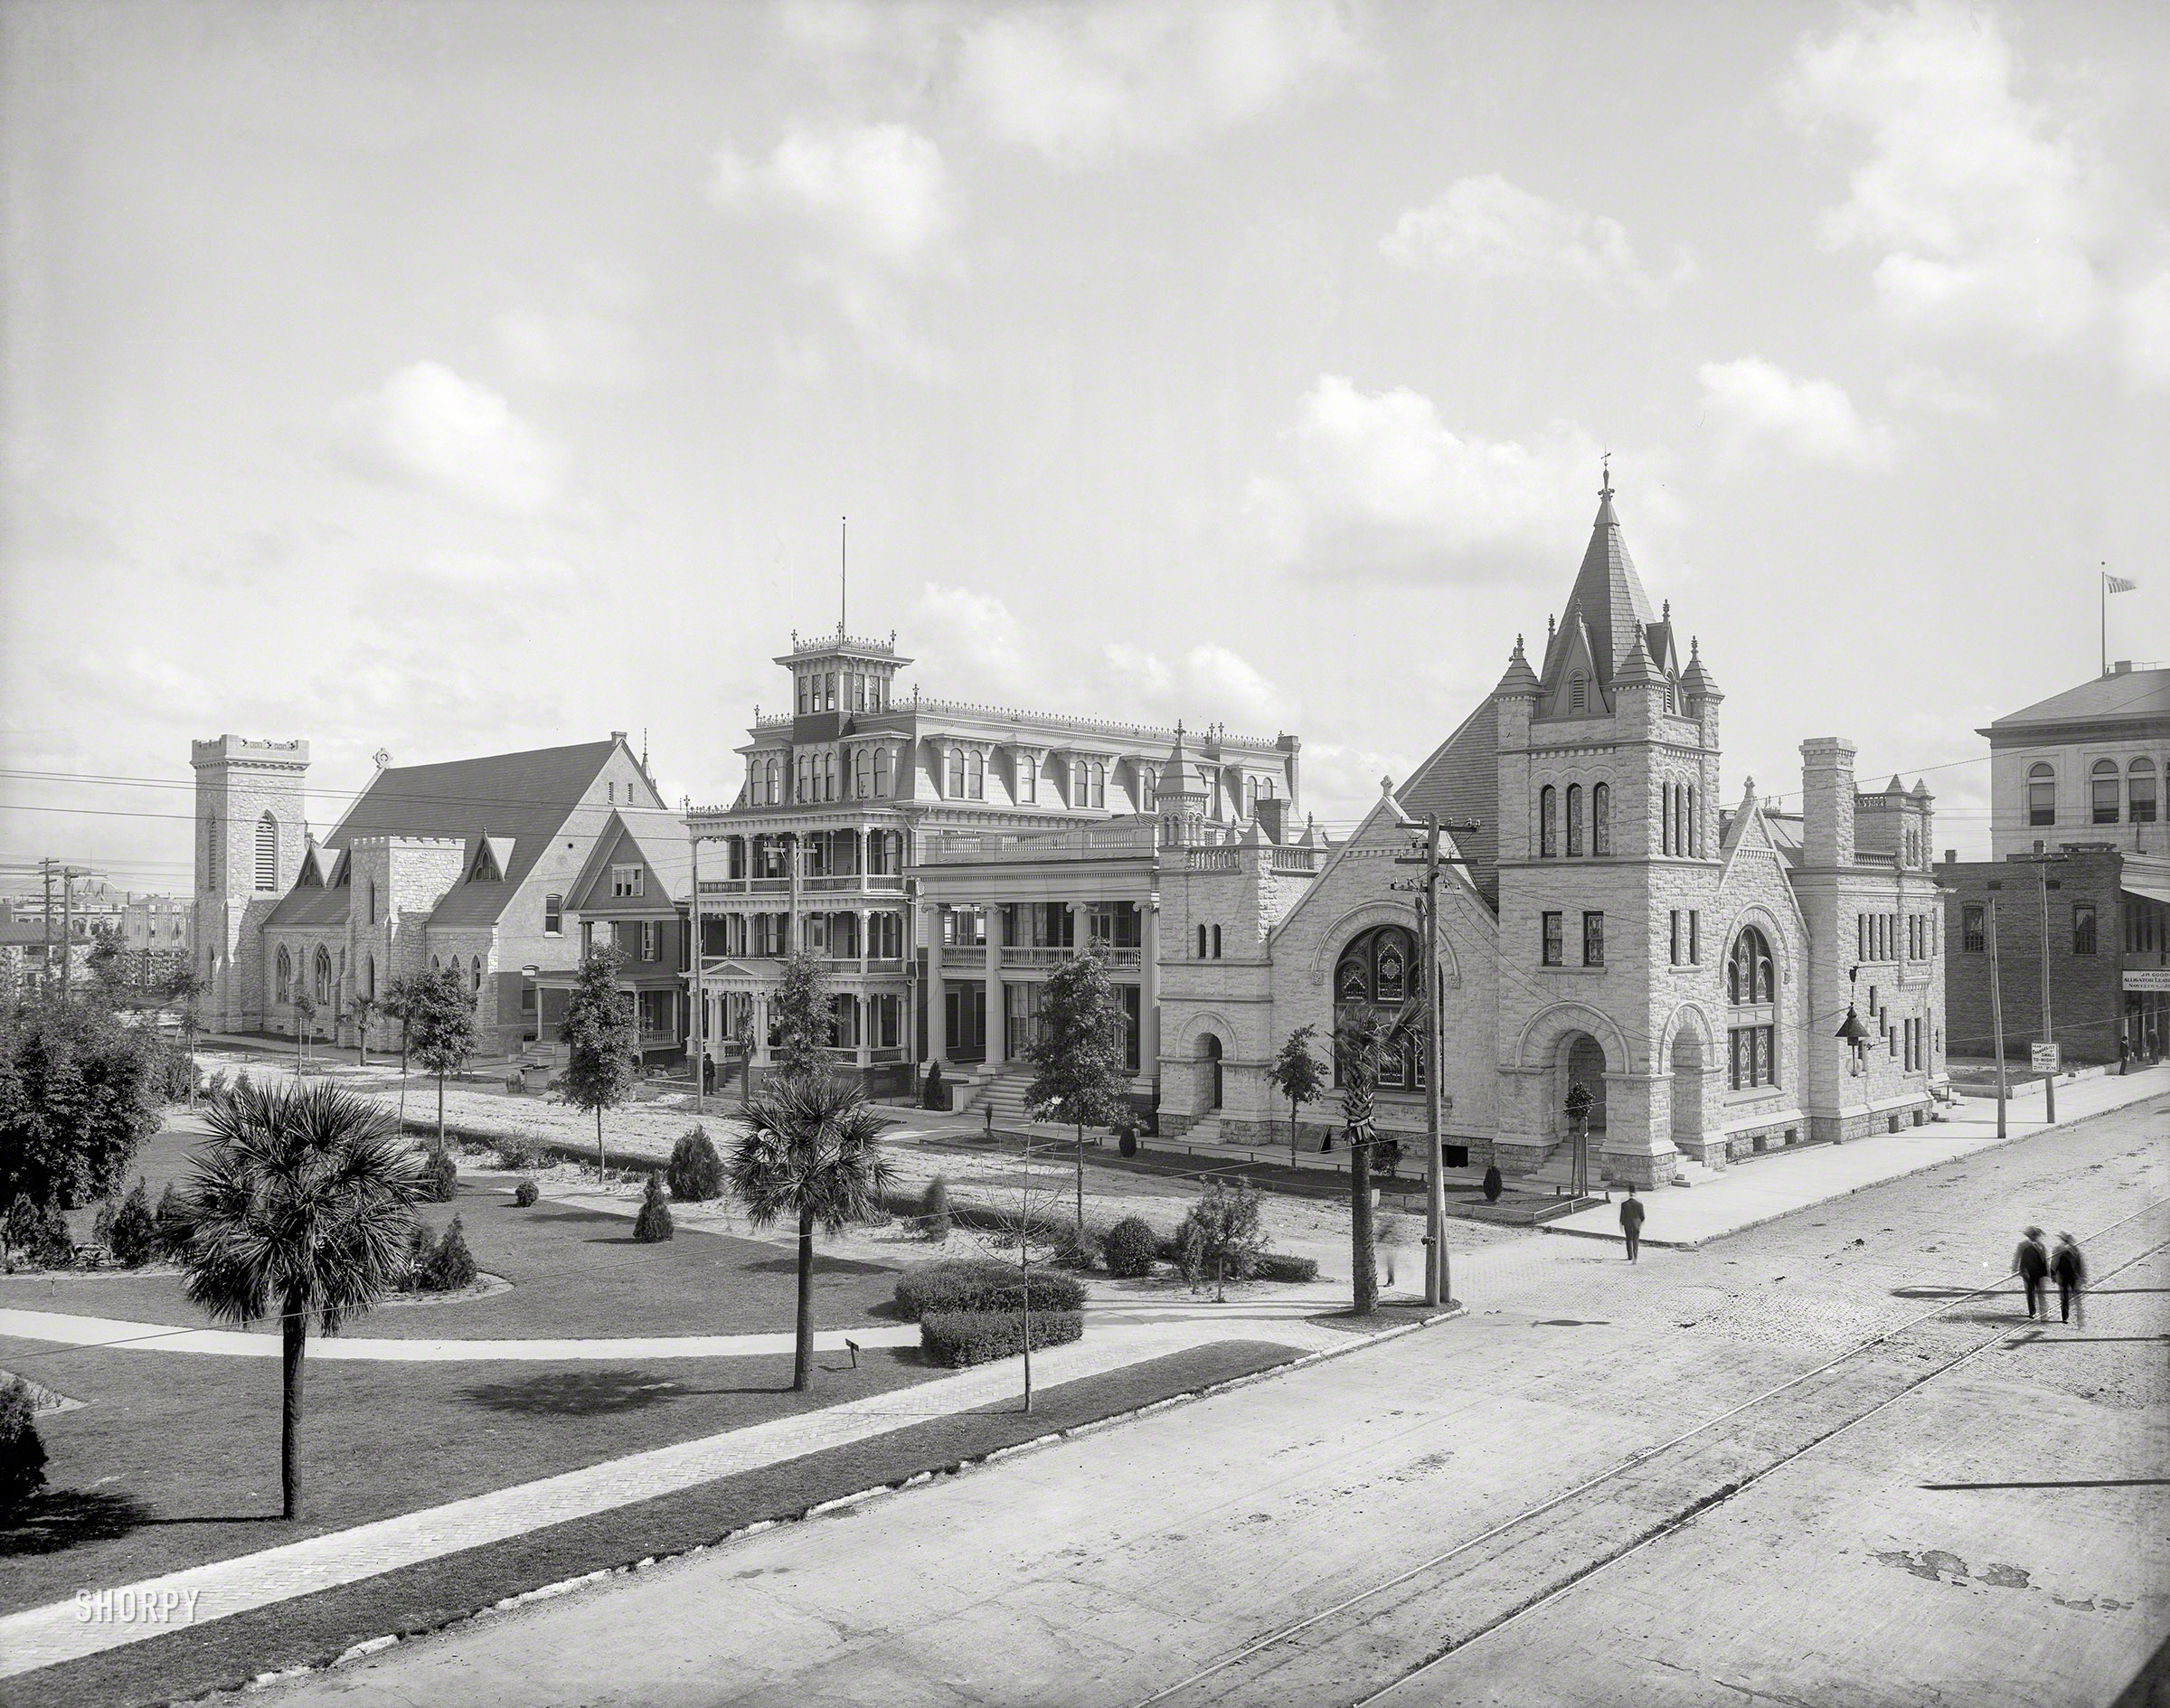 Jacksonville, Florida, circa 1904. "Hemming Park and Monroe Street." "Hear evangelist Small to-night." 8x10 inch dry plate glass negative, Detroit Photographic Company. View full size.